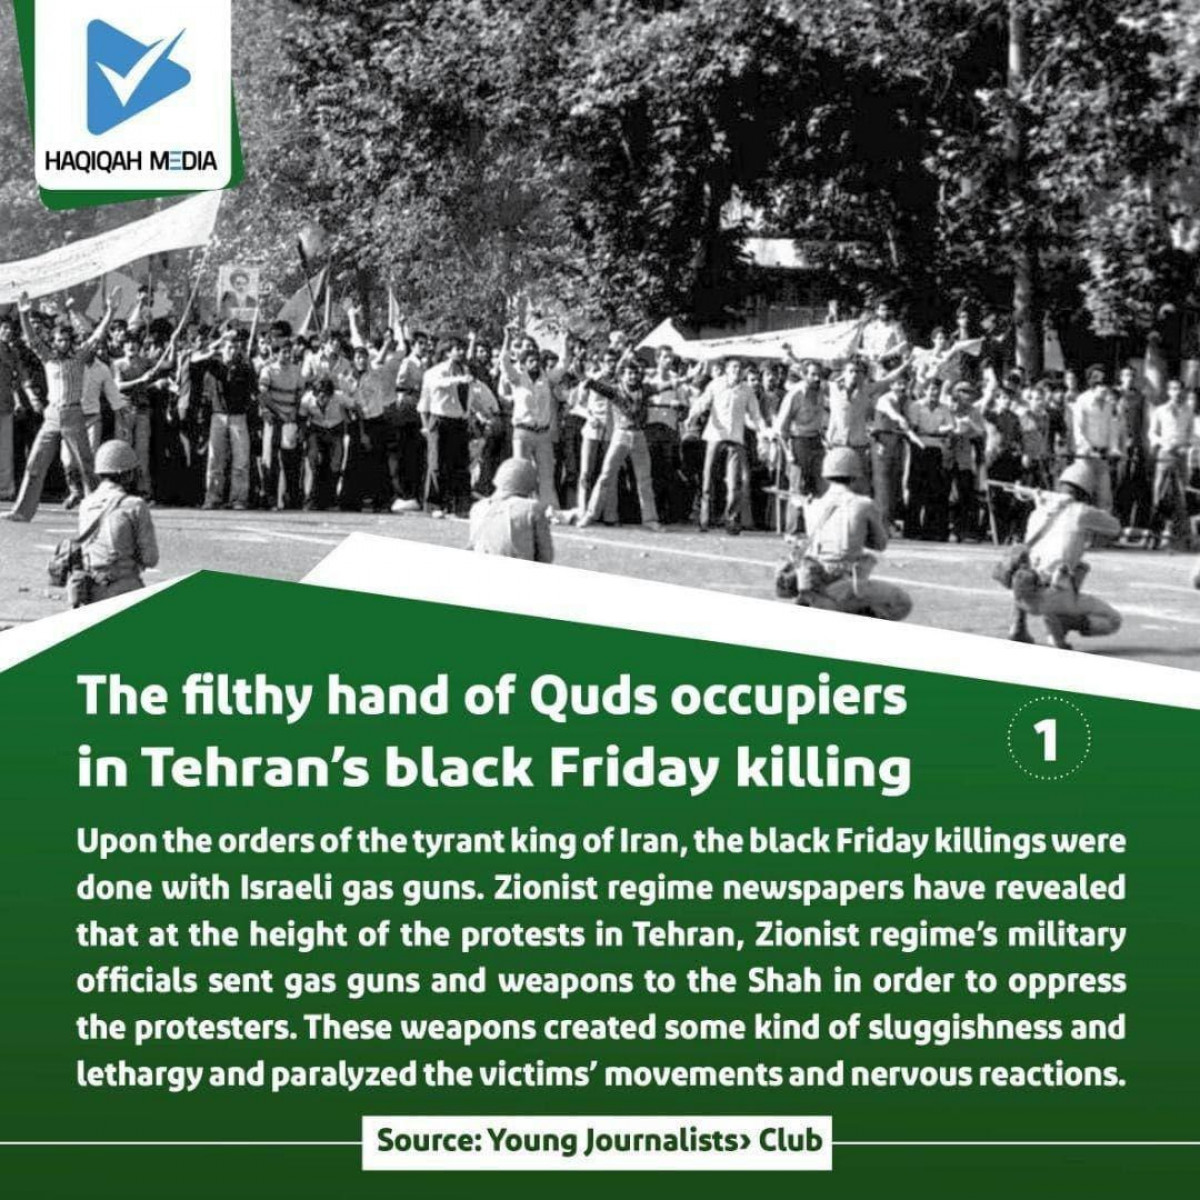 The filthy hand of Quds occupiers in Tehran's black Friday killing